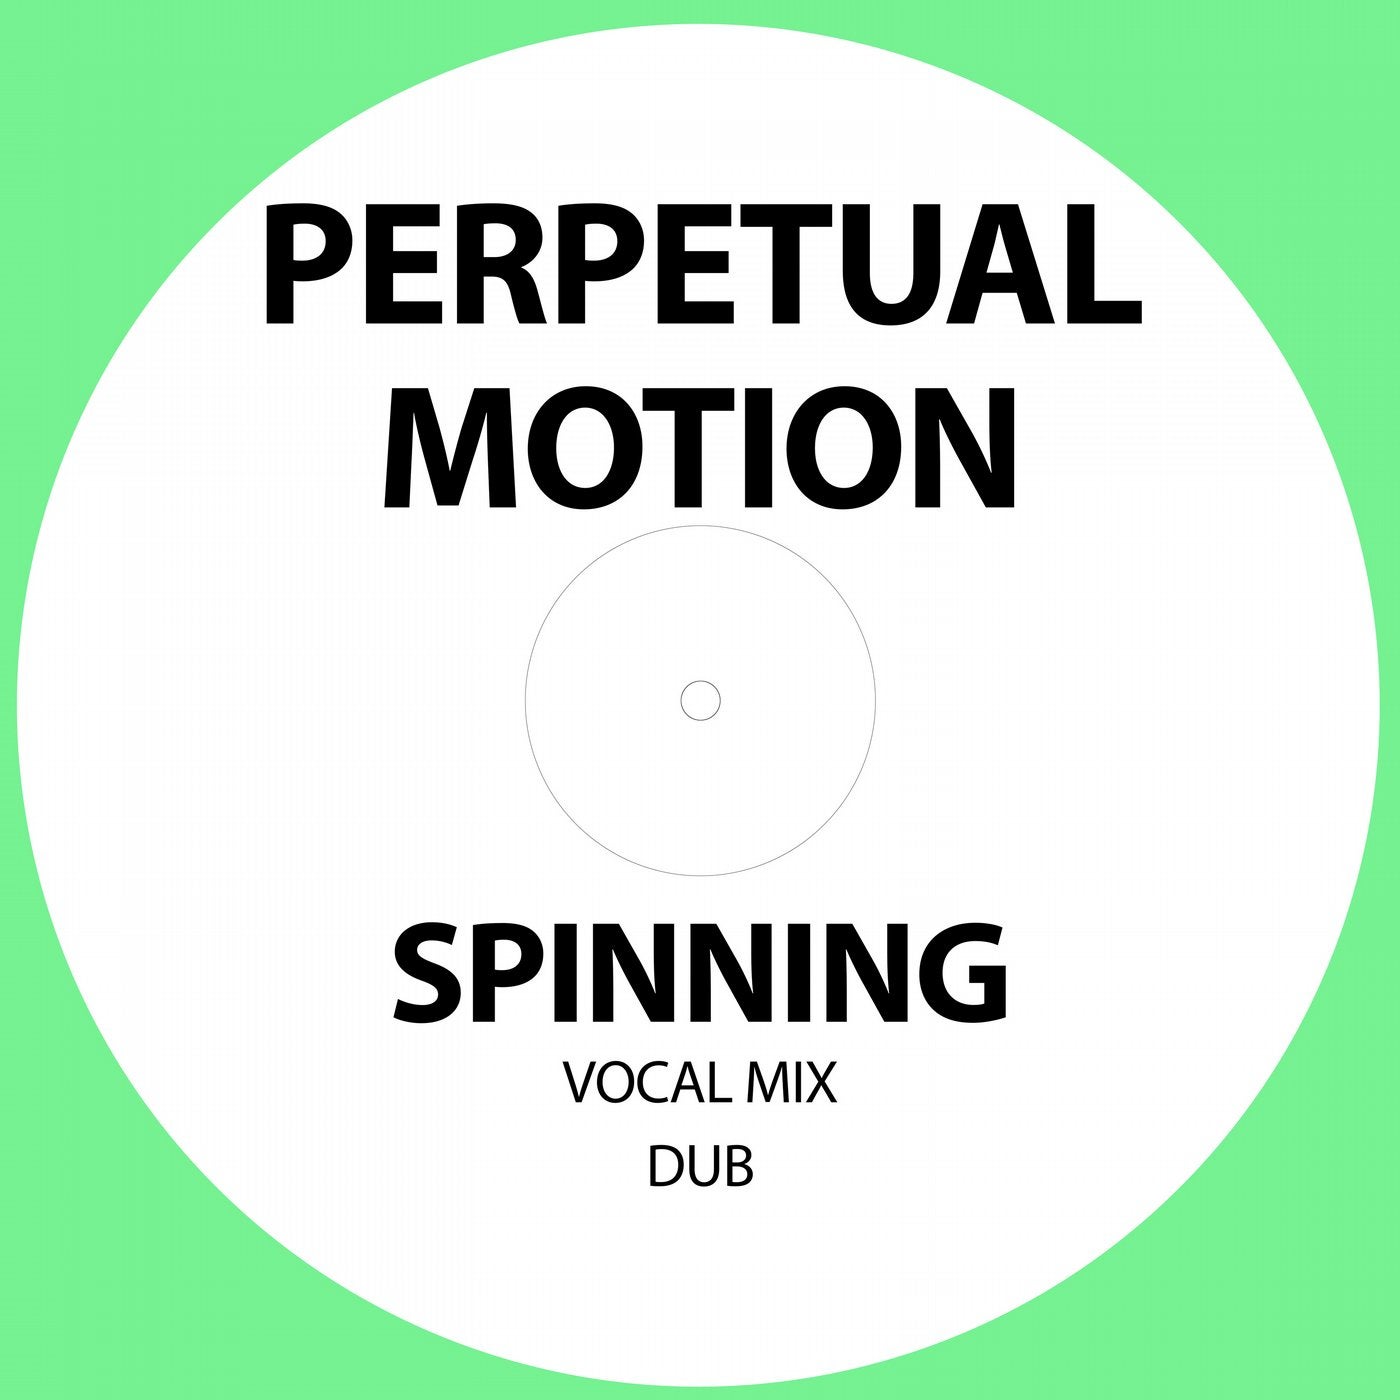 Spinning музыка. Perpetual Motion LUKHASH. Motion песня. Spin музыка. PMS (Perpetual Motion Squad).